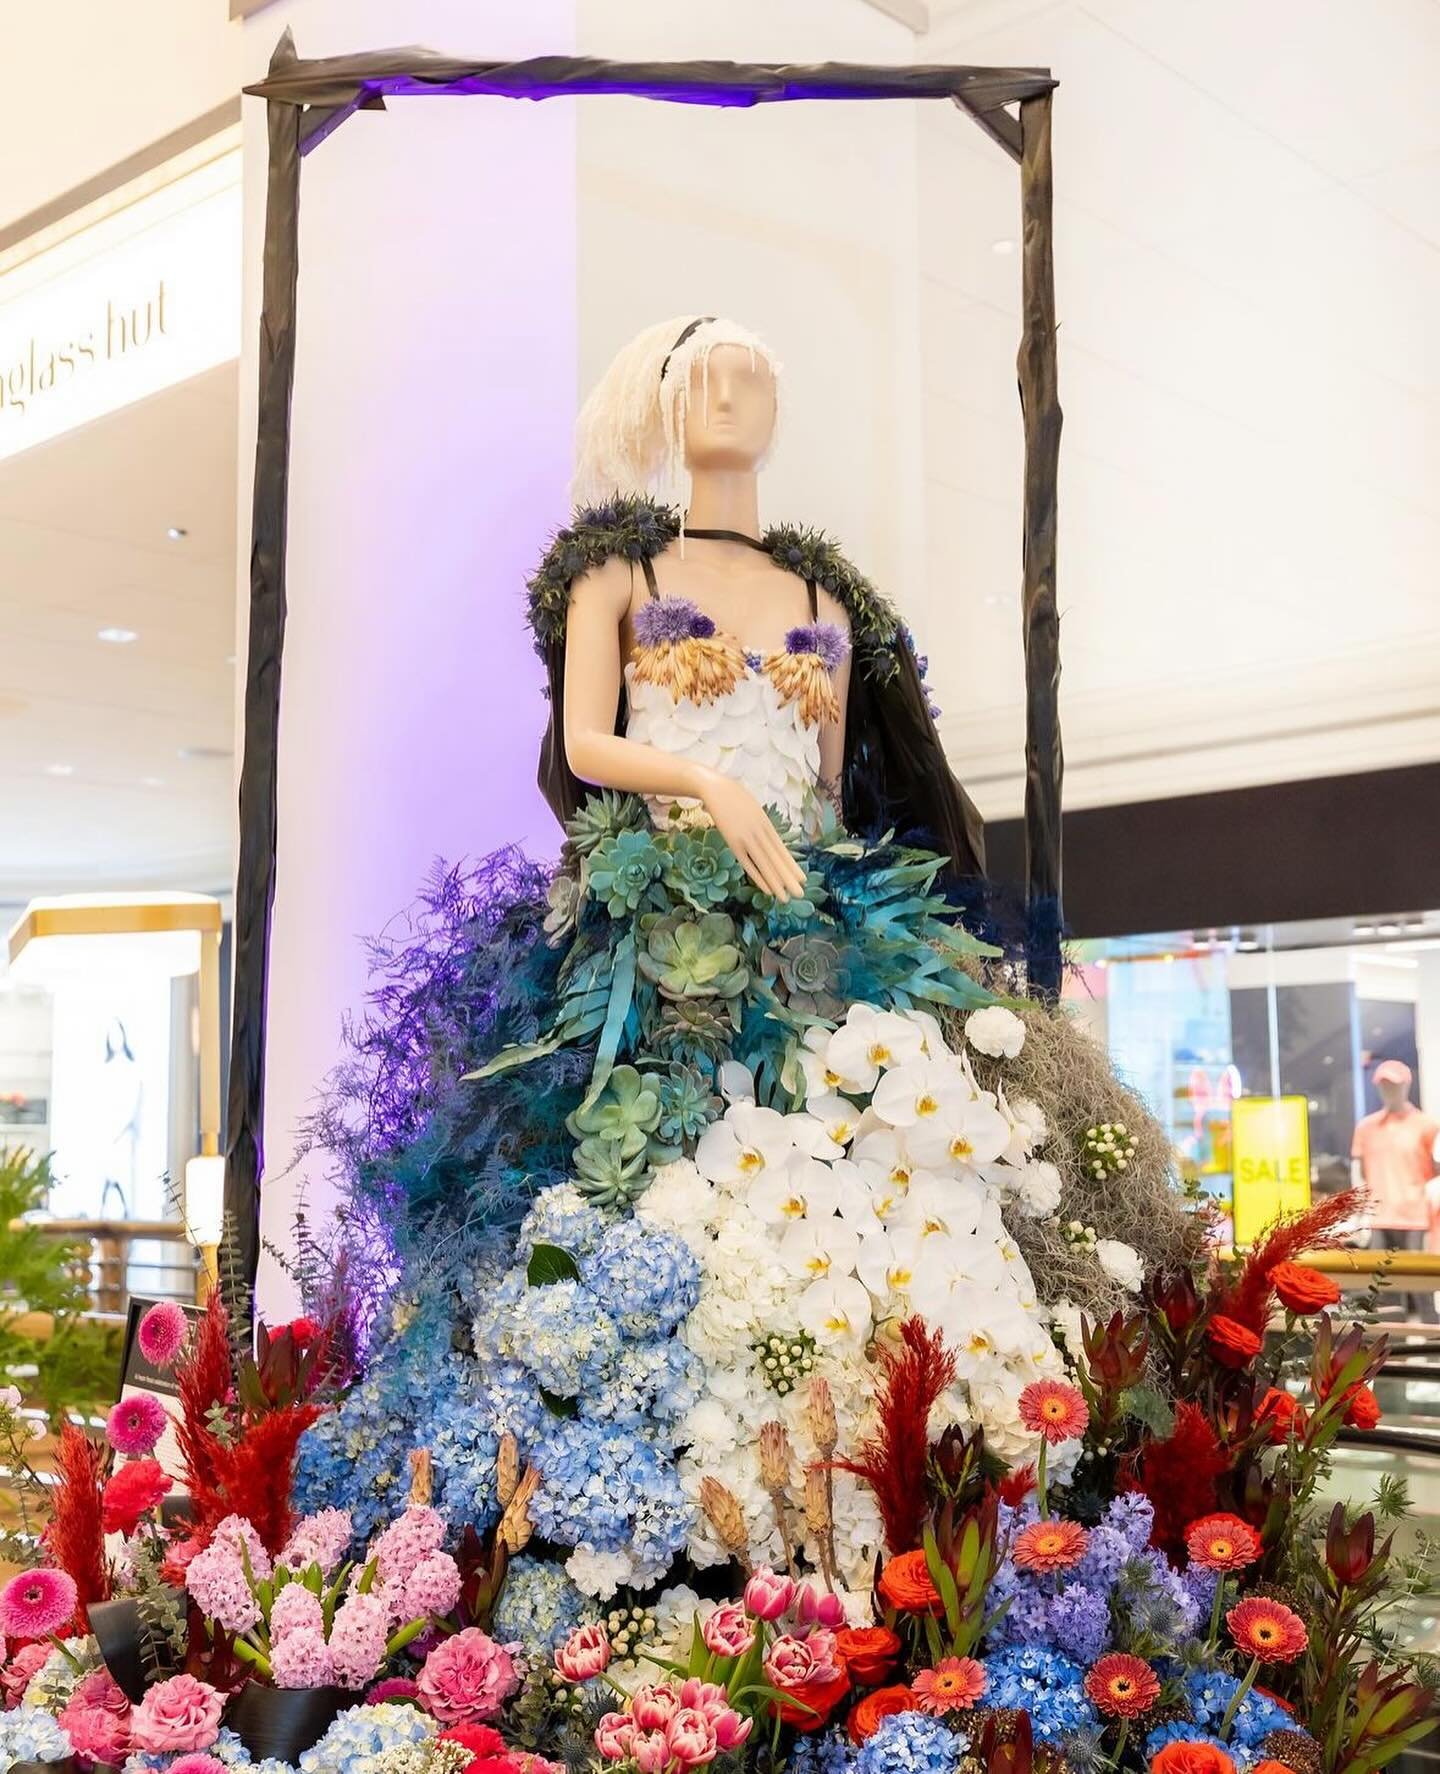 There she is! This was one of our favorite projects ever. It was so much fun to create! Be sure to see her in person and all the other amazing designs @900shops until Sunday. These amazing shots are 📷 by @byveronicaphotography . Thank you to my amaz